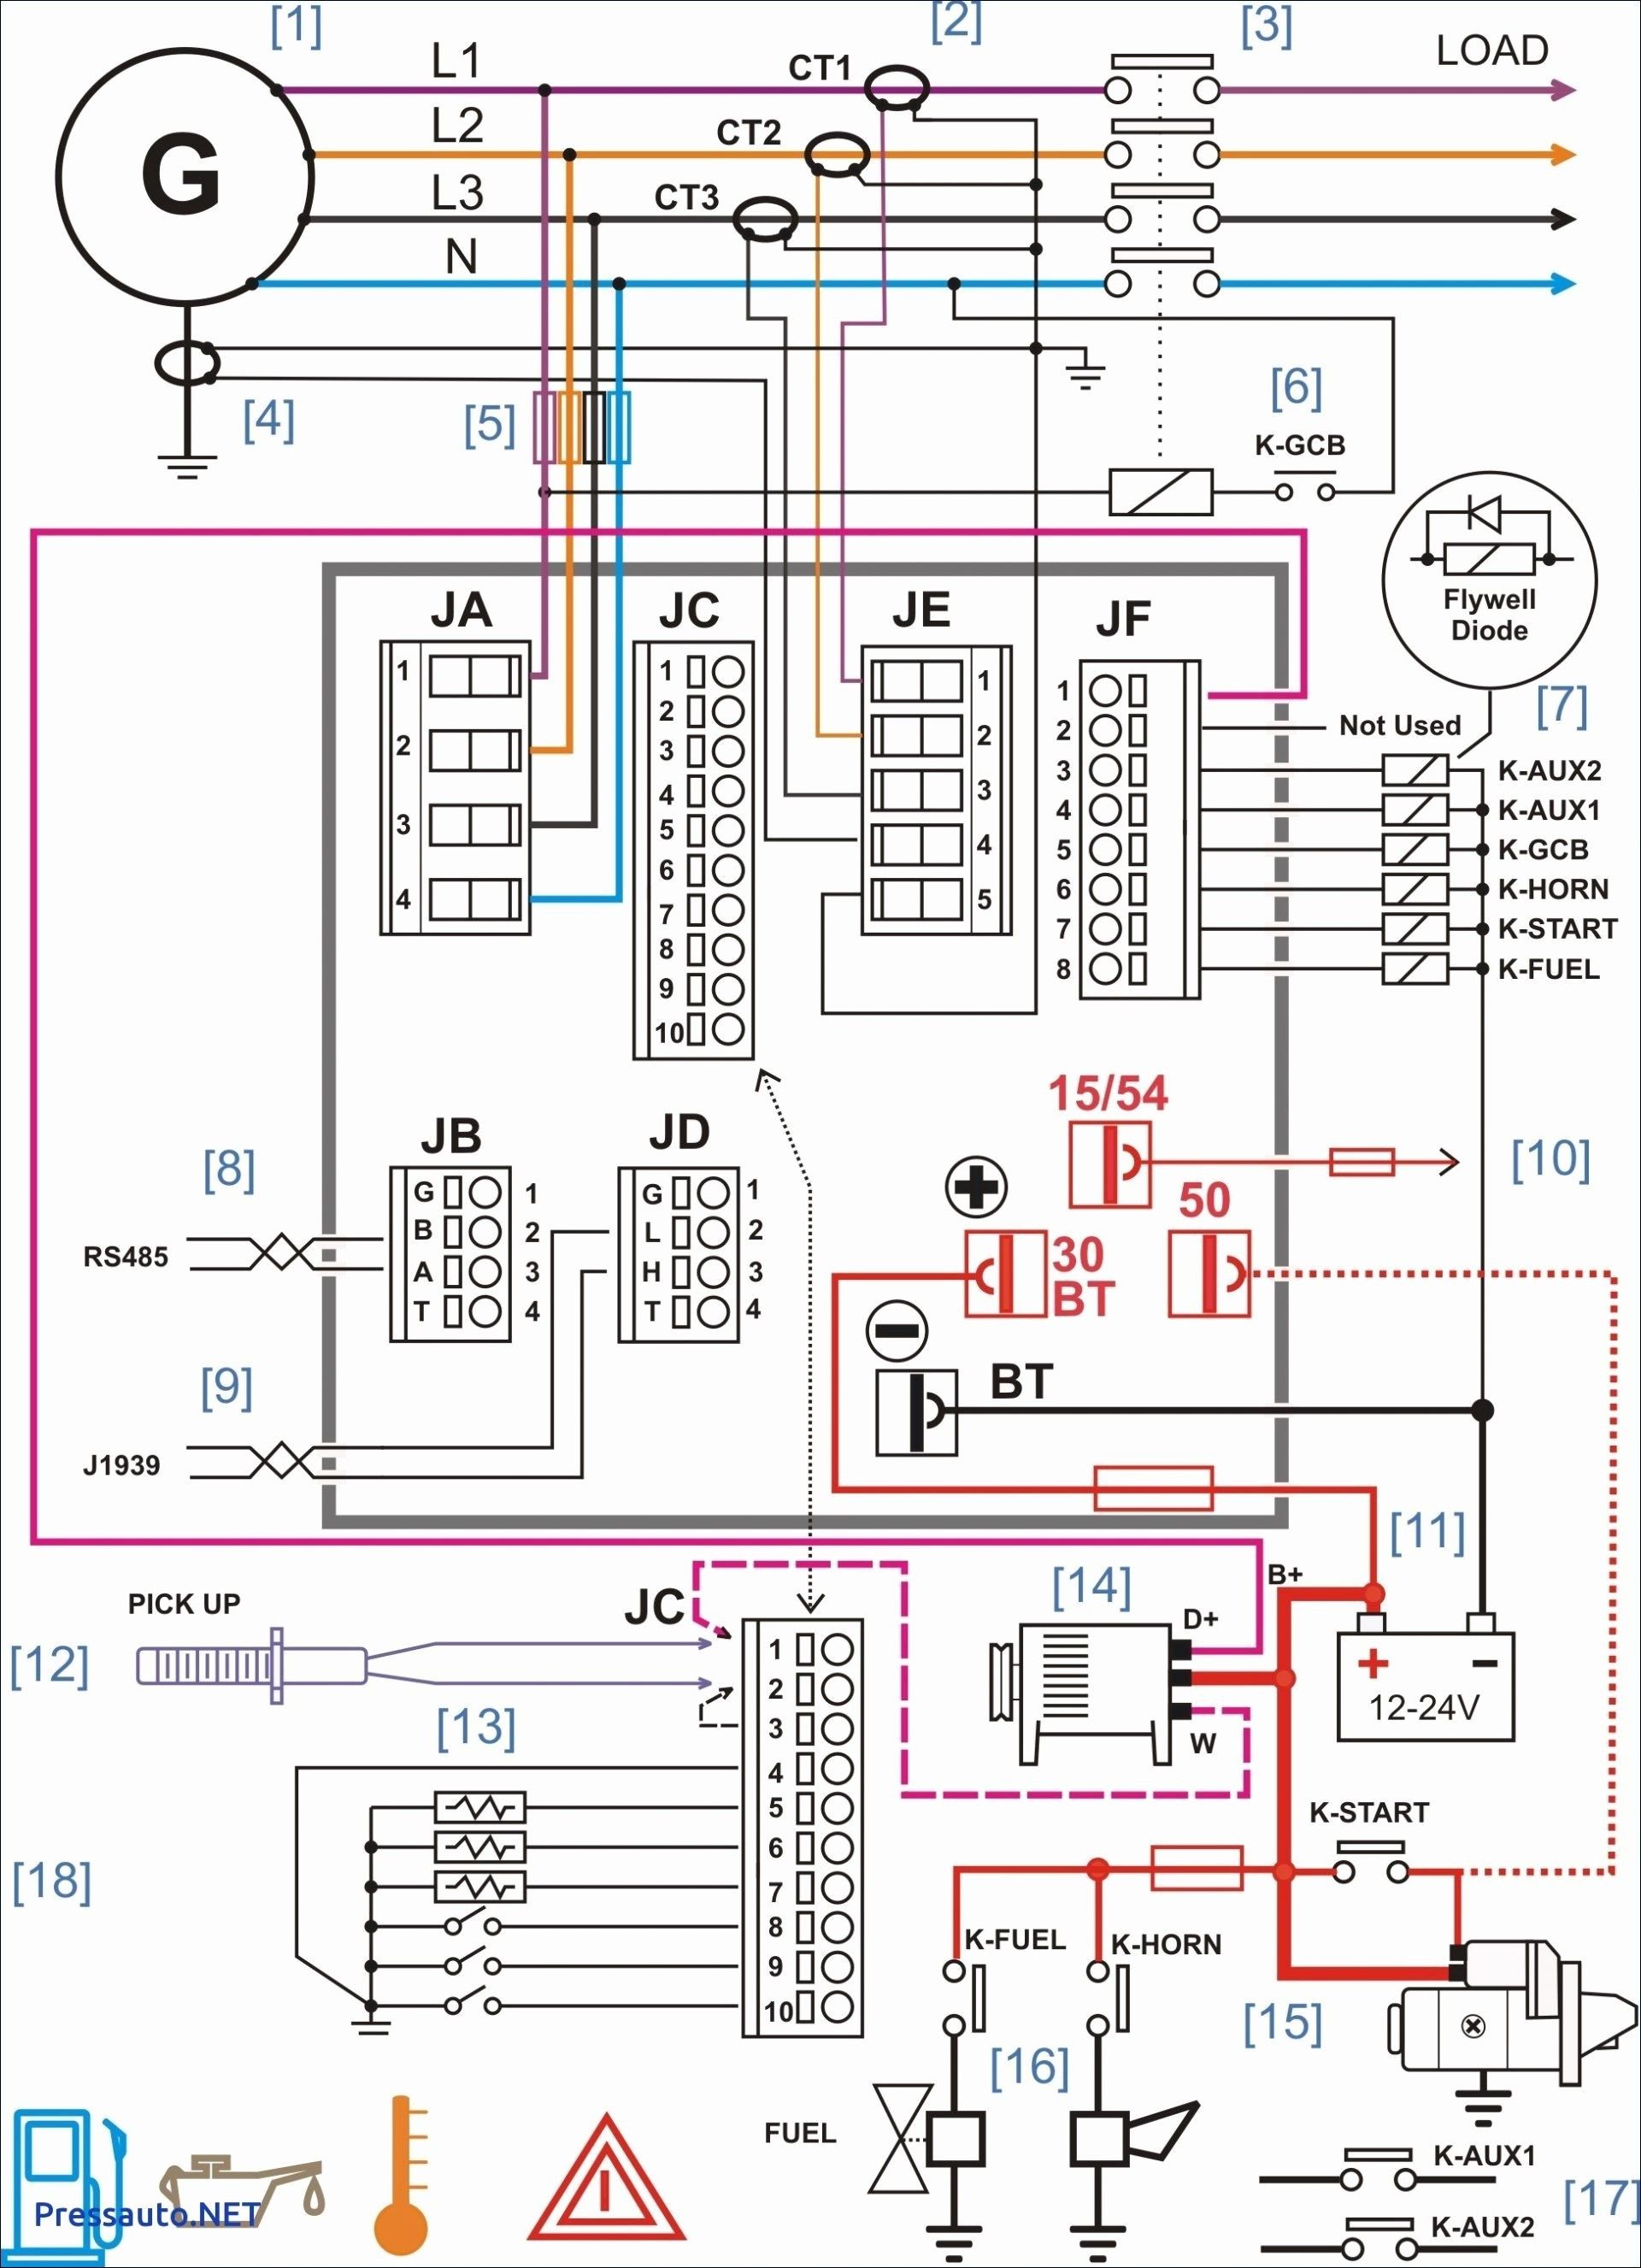 House Electrical Wiring Diagram Pdf, Electric House Wiring Diagram Pdf